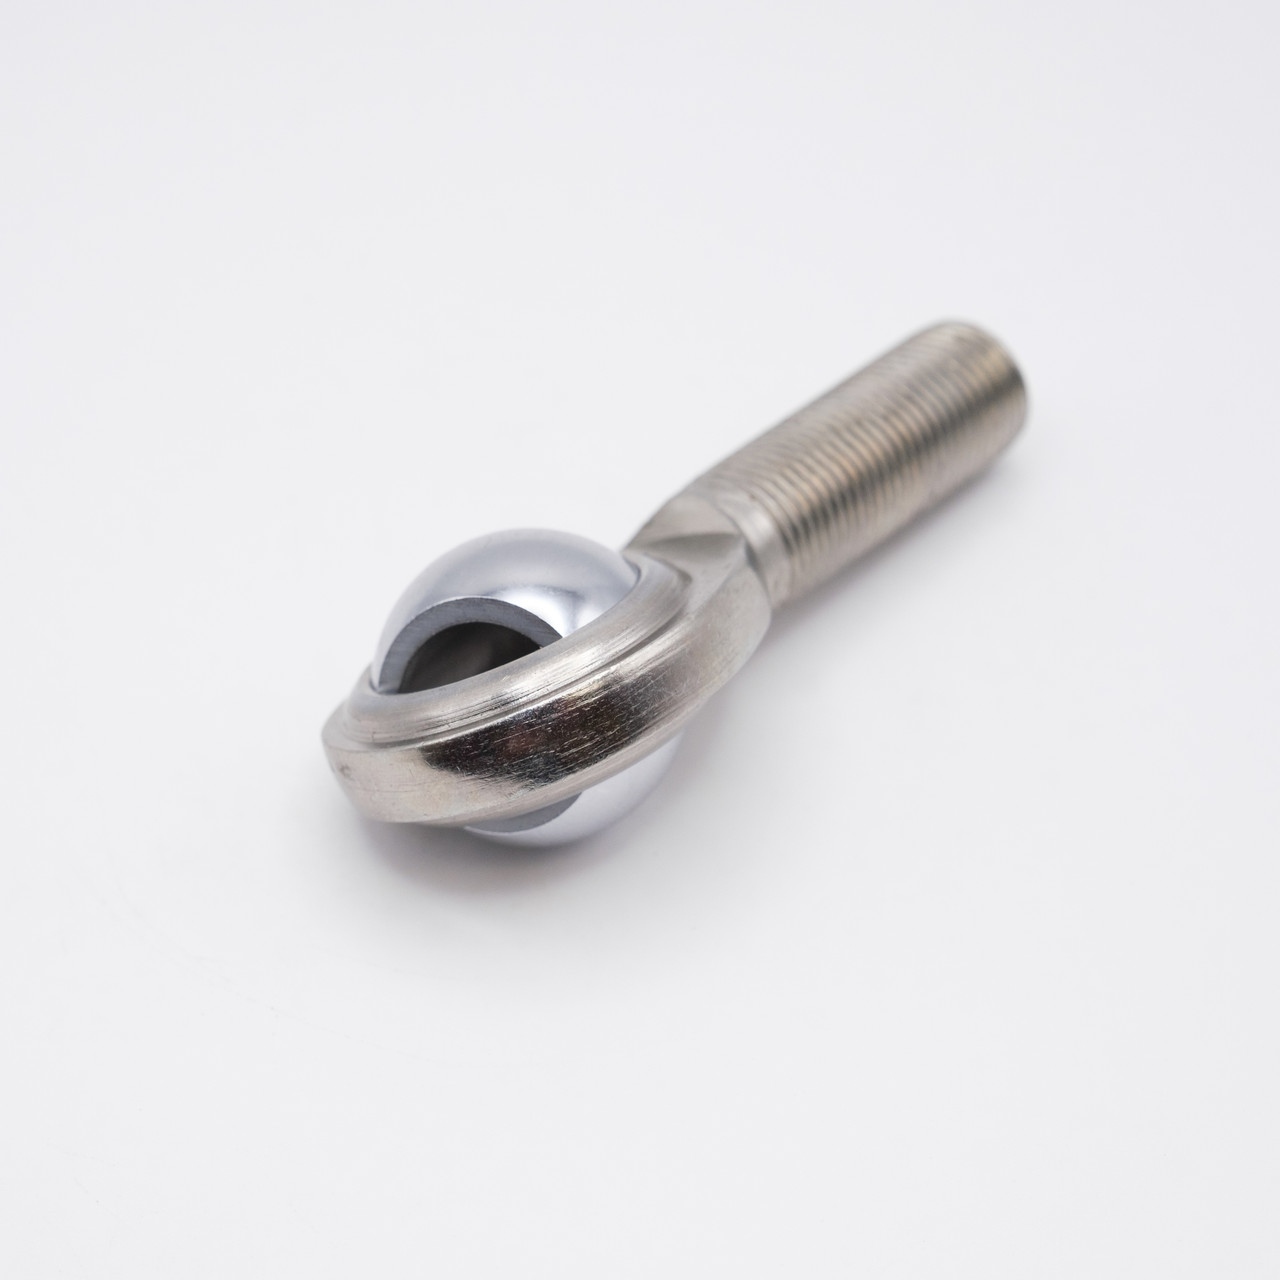 MM-16 Male Rod-End Bearing 1" Bore Top View